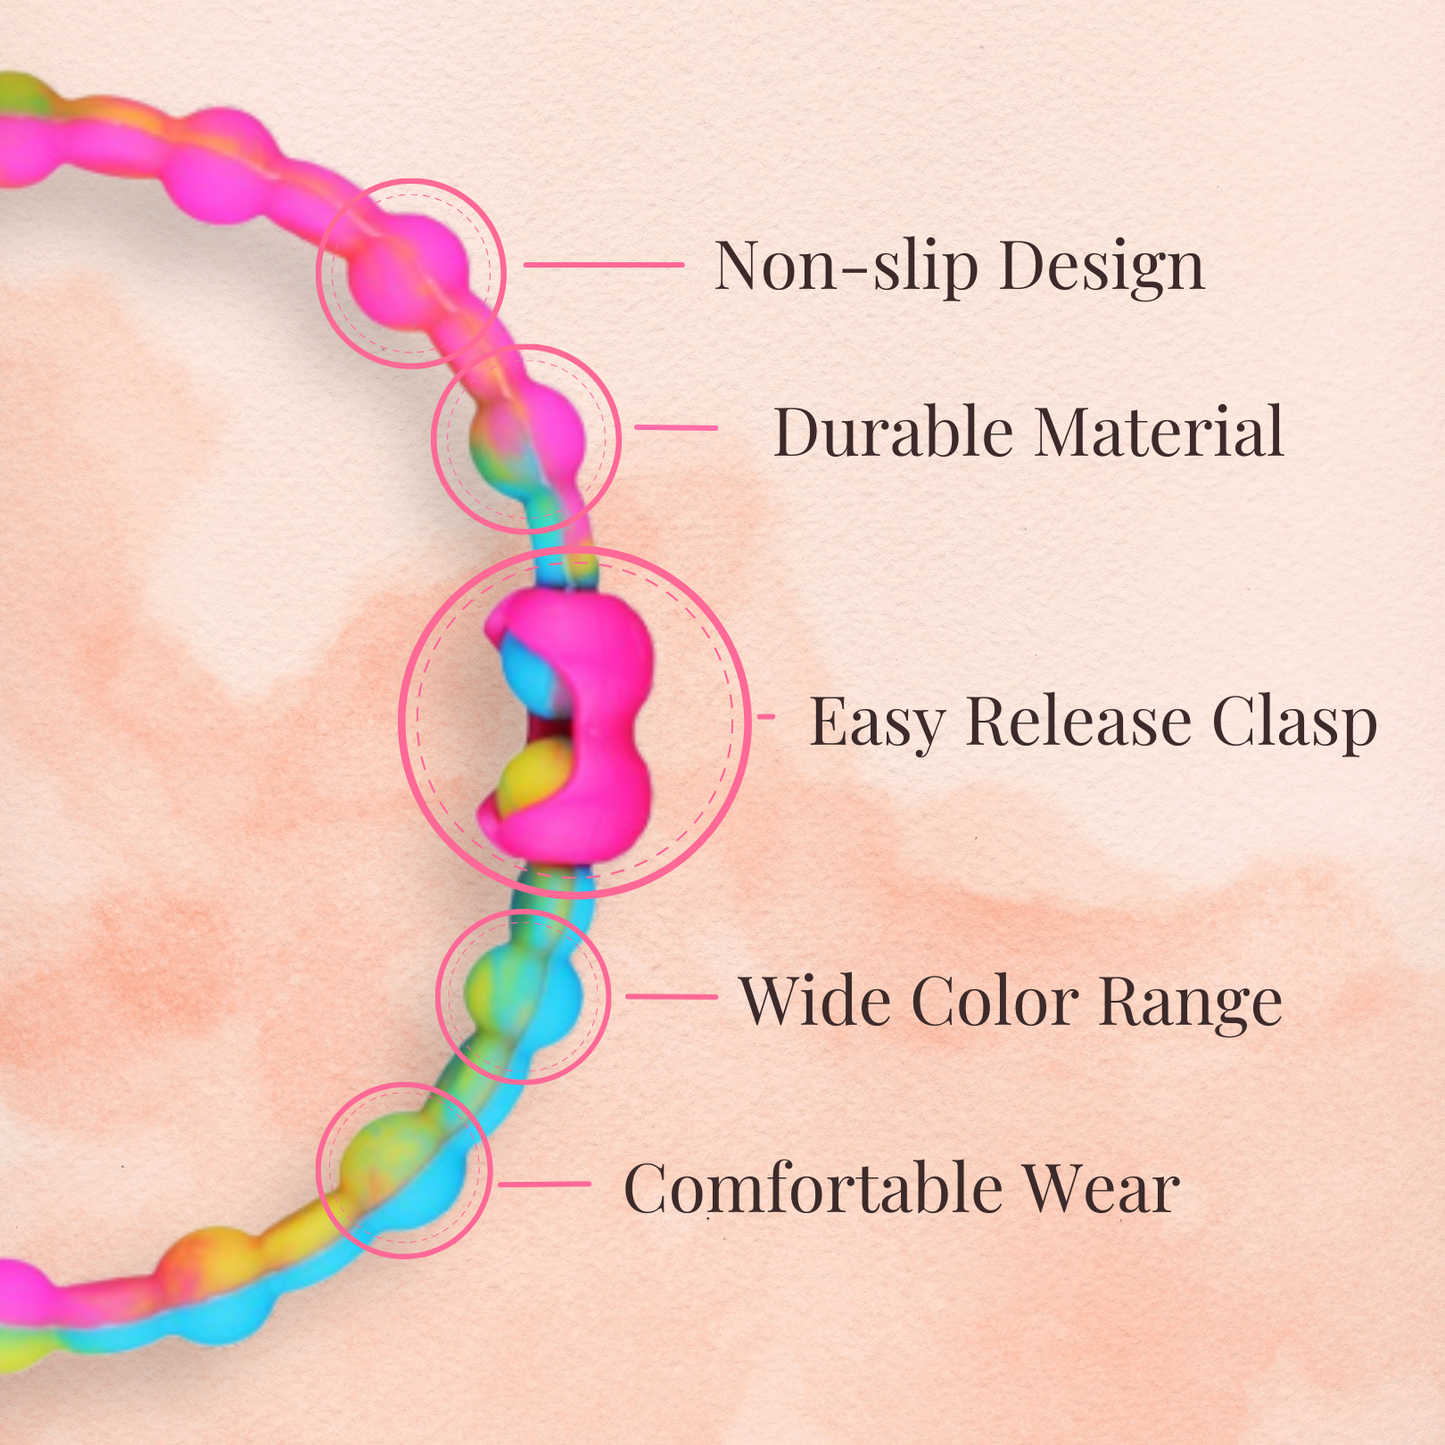 Cloudy Grey Hair Ties (8 Pack) - Effortless Style with a Touch of Mystery